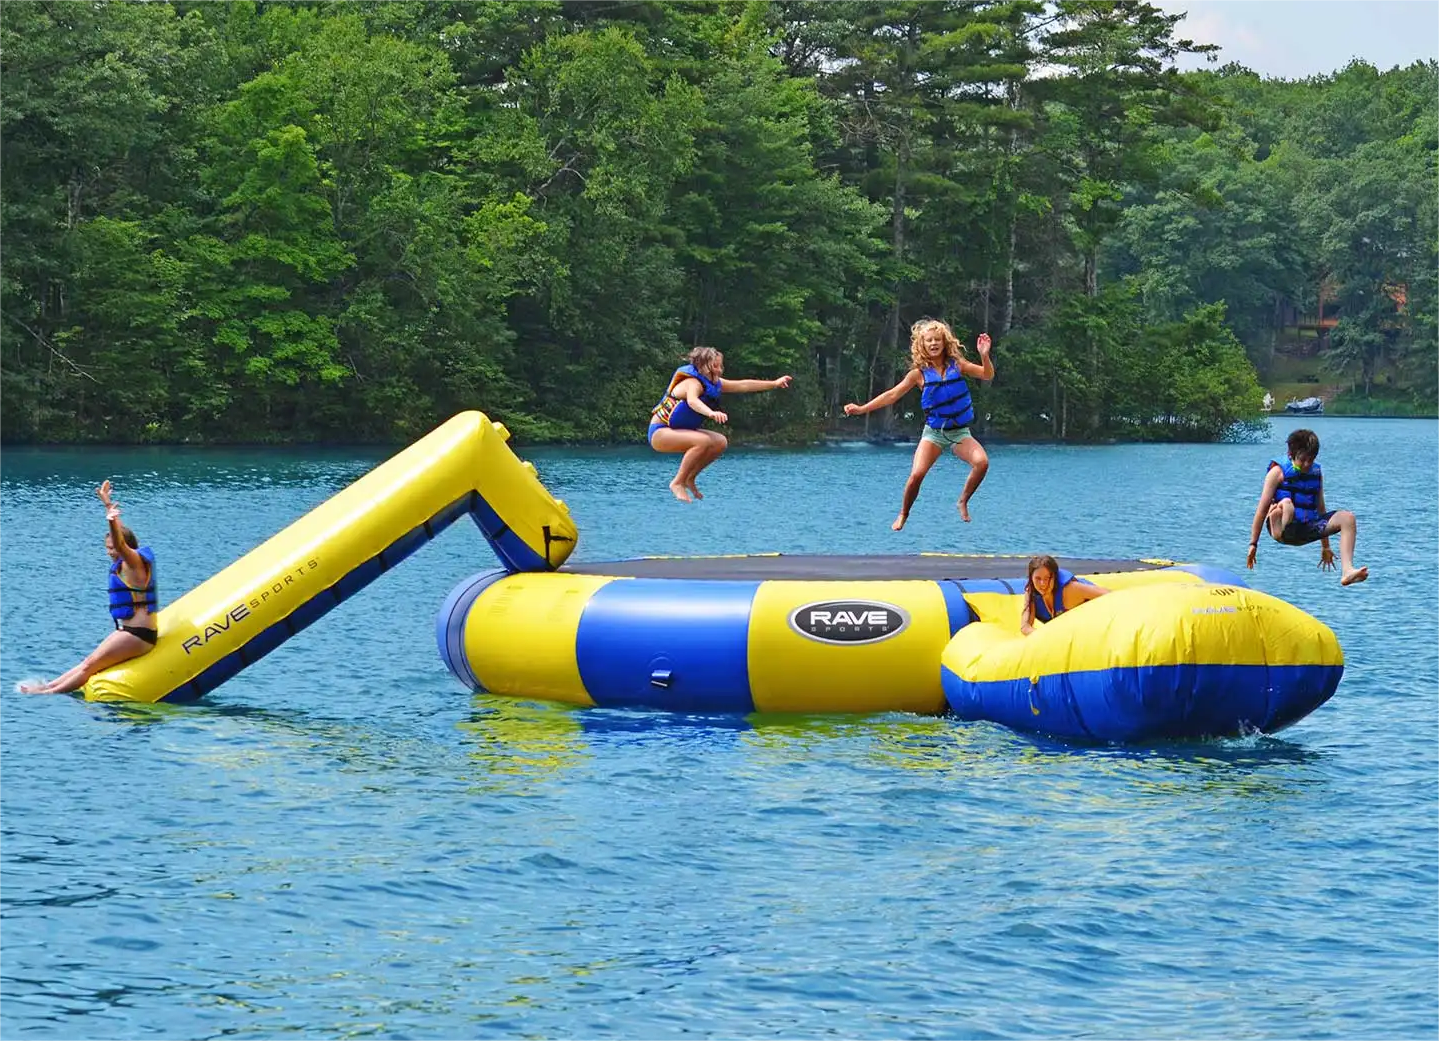 water tranpoline Customized PVC Water Trampoline Inflatable Floating Trampoline Water Trampoline for Water Funworldsport Customized Size Color Logo Wet and Dry Water Trampoline with Slide for Safety Gymnastics water tranpoline,Floating Trampoline Jumping